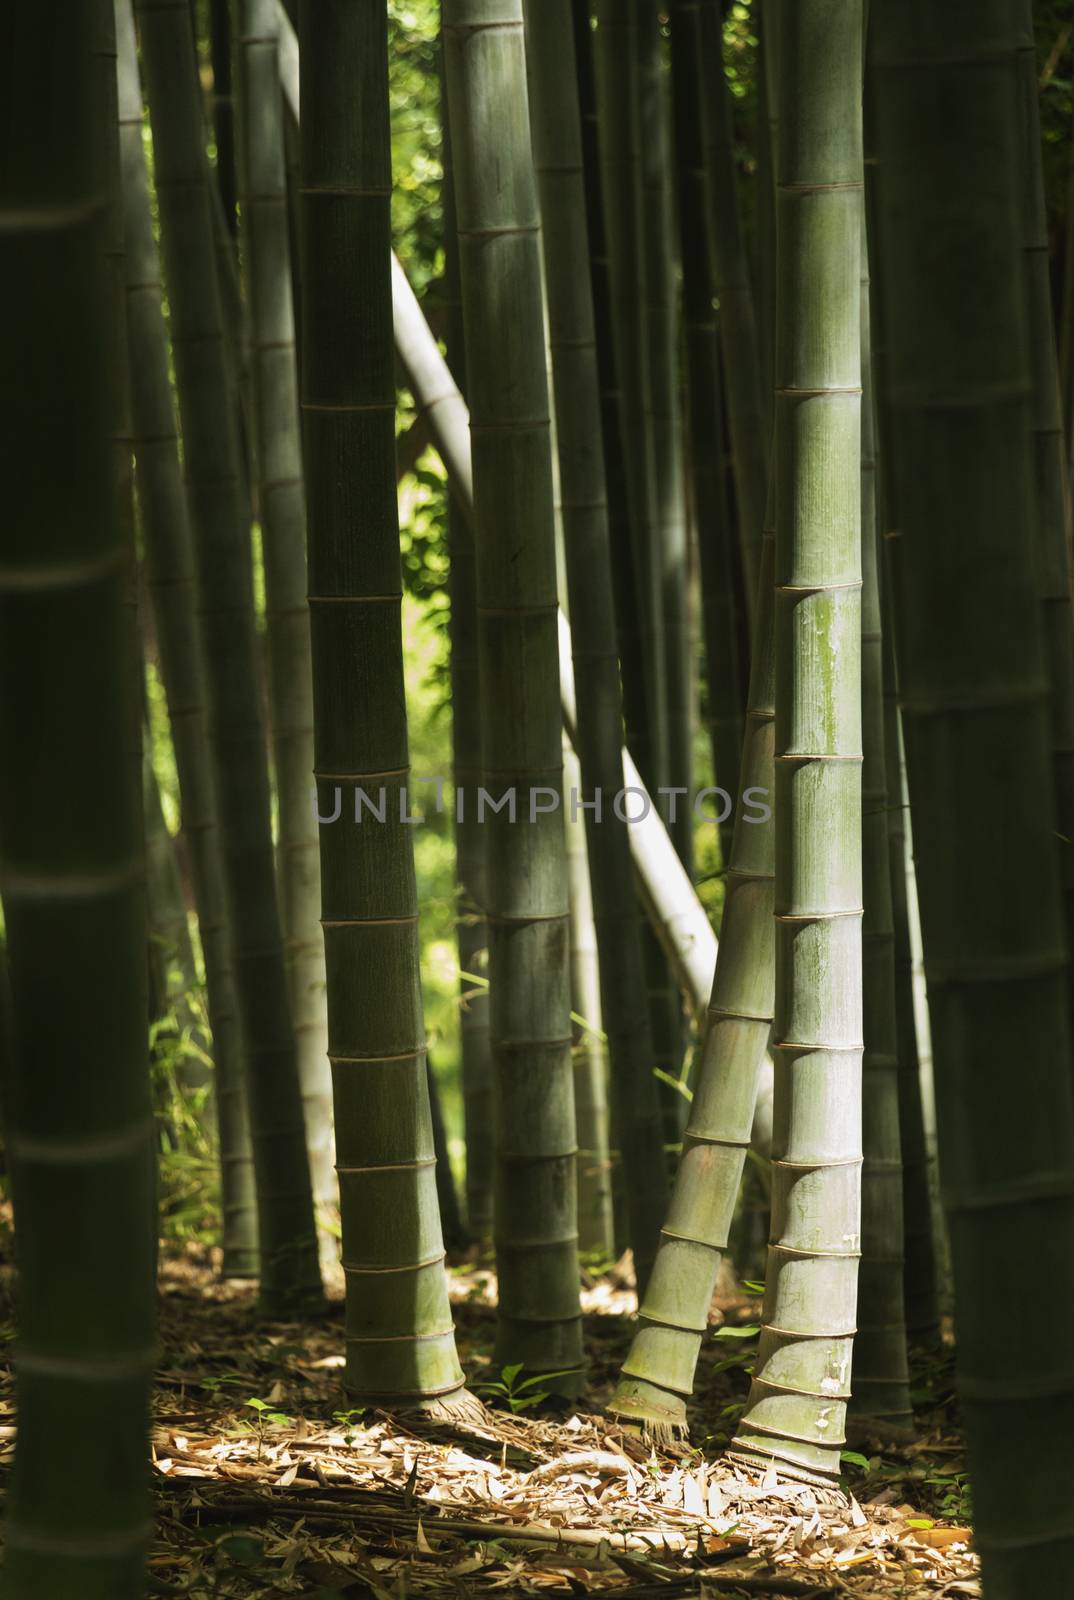 Bamboo grove,high light contrast ,saturated colors ,vertical composition